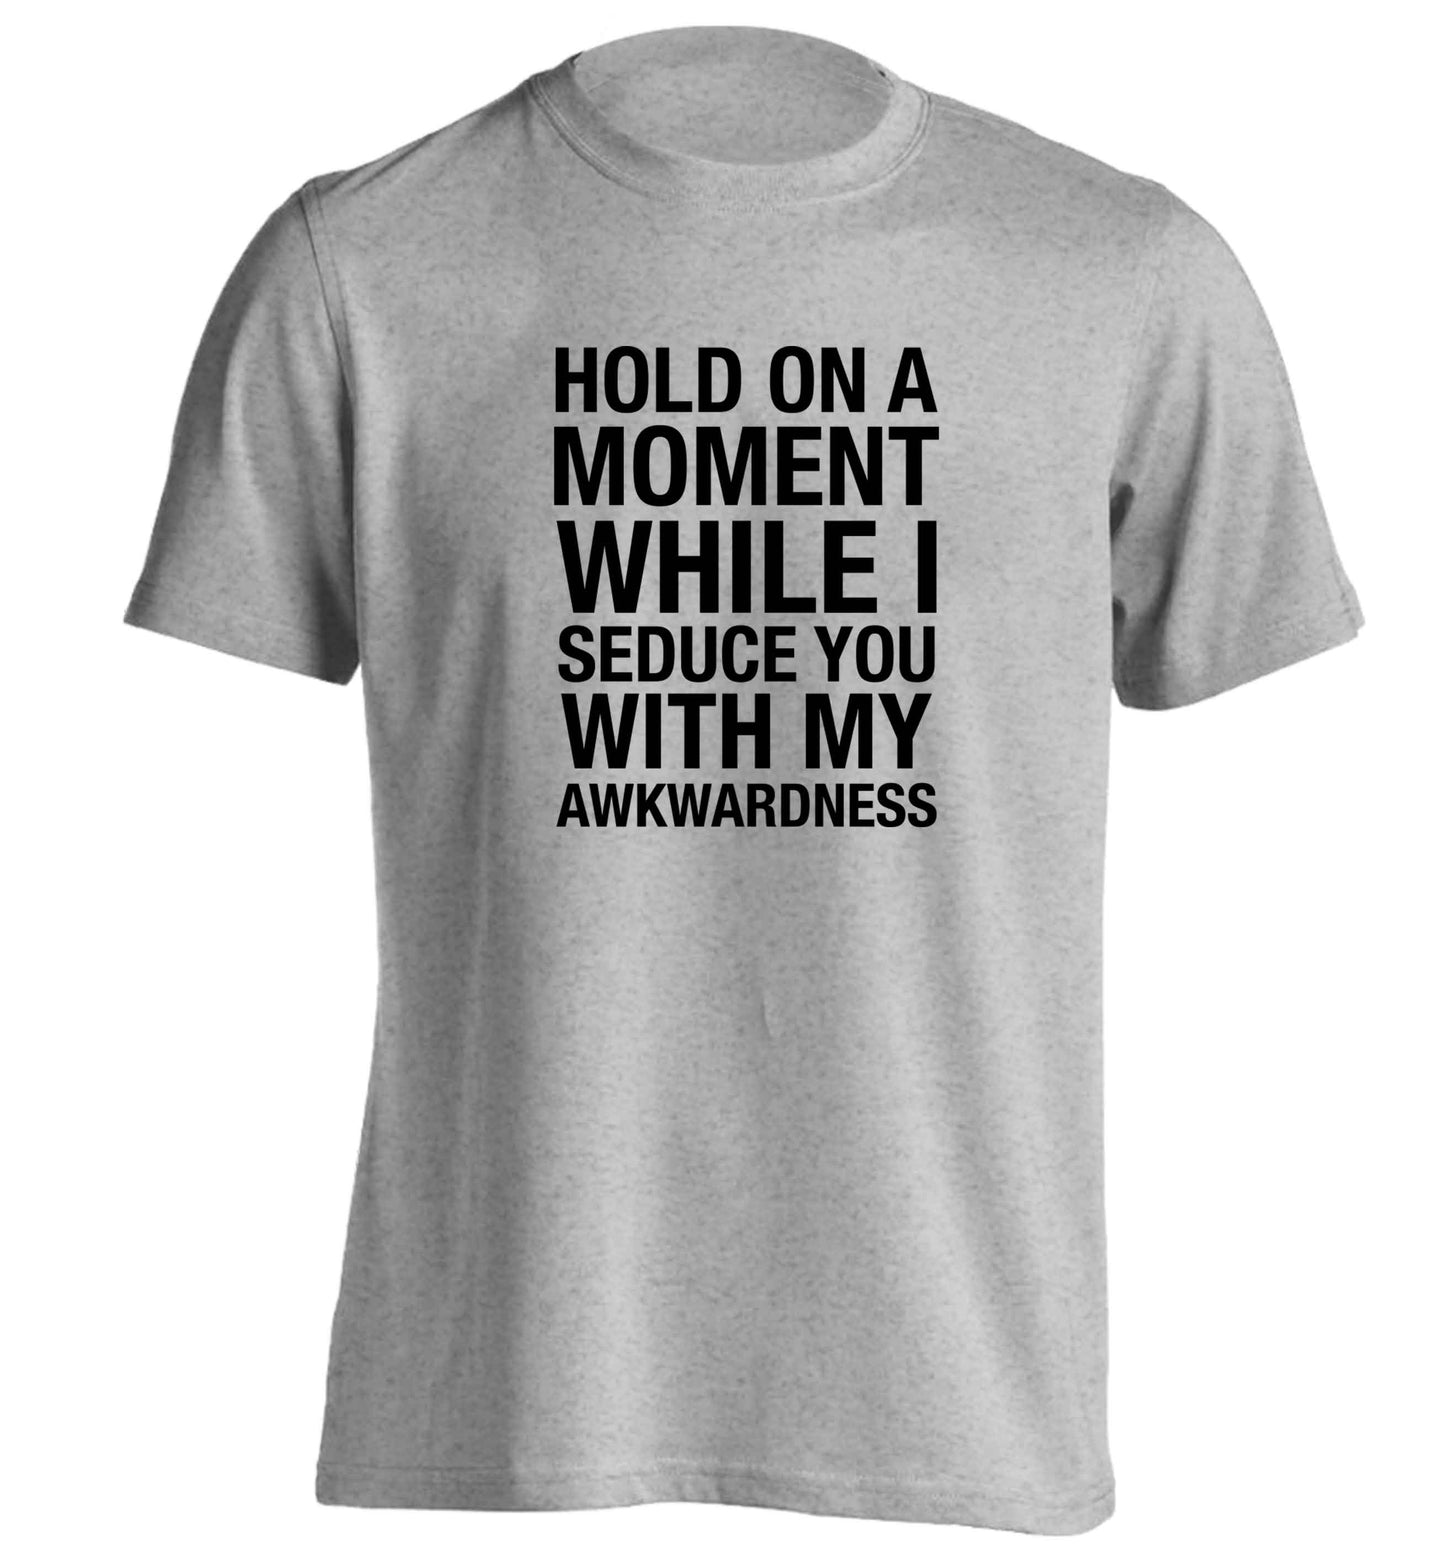 Hold on a moment while I seduce you with my awkwardness adults unisex grey Tshirt 2XL